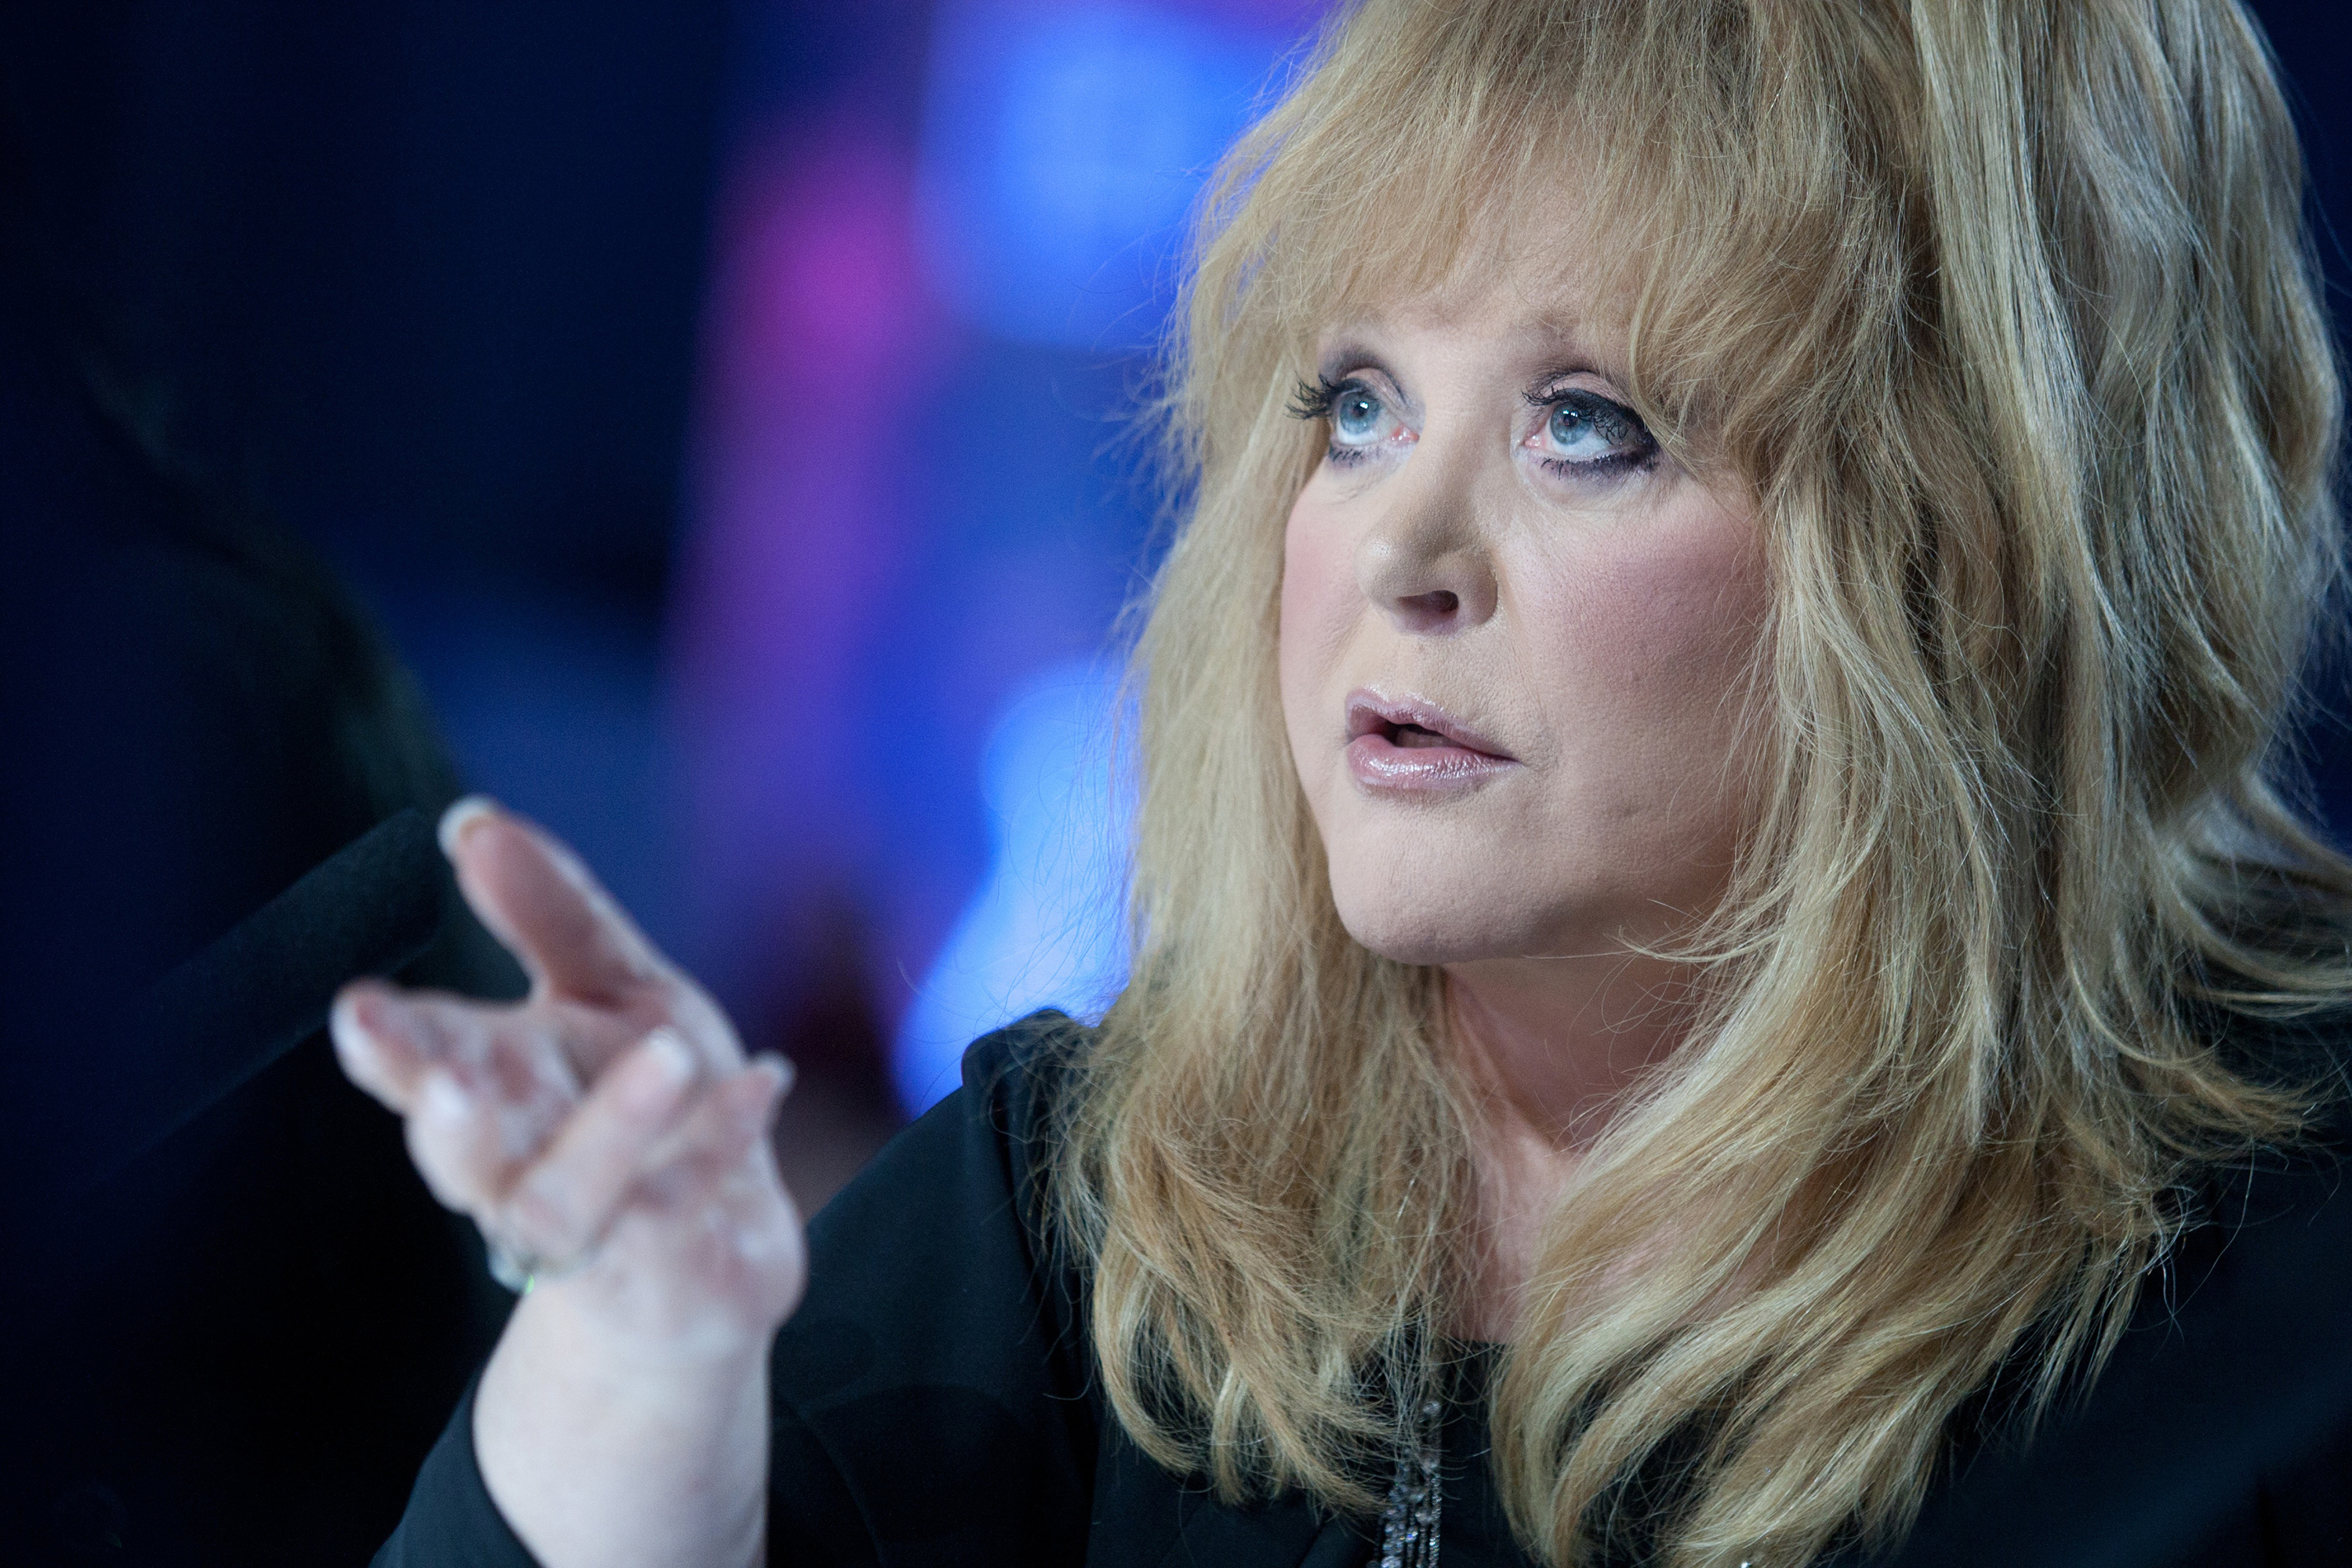 Russian pop legend Alla Pugacheva looks on during a casting session for a musical television show on March 22, 2011 in Moscow, Russia.